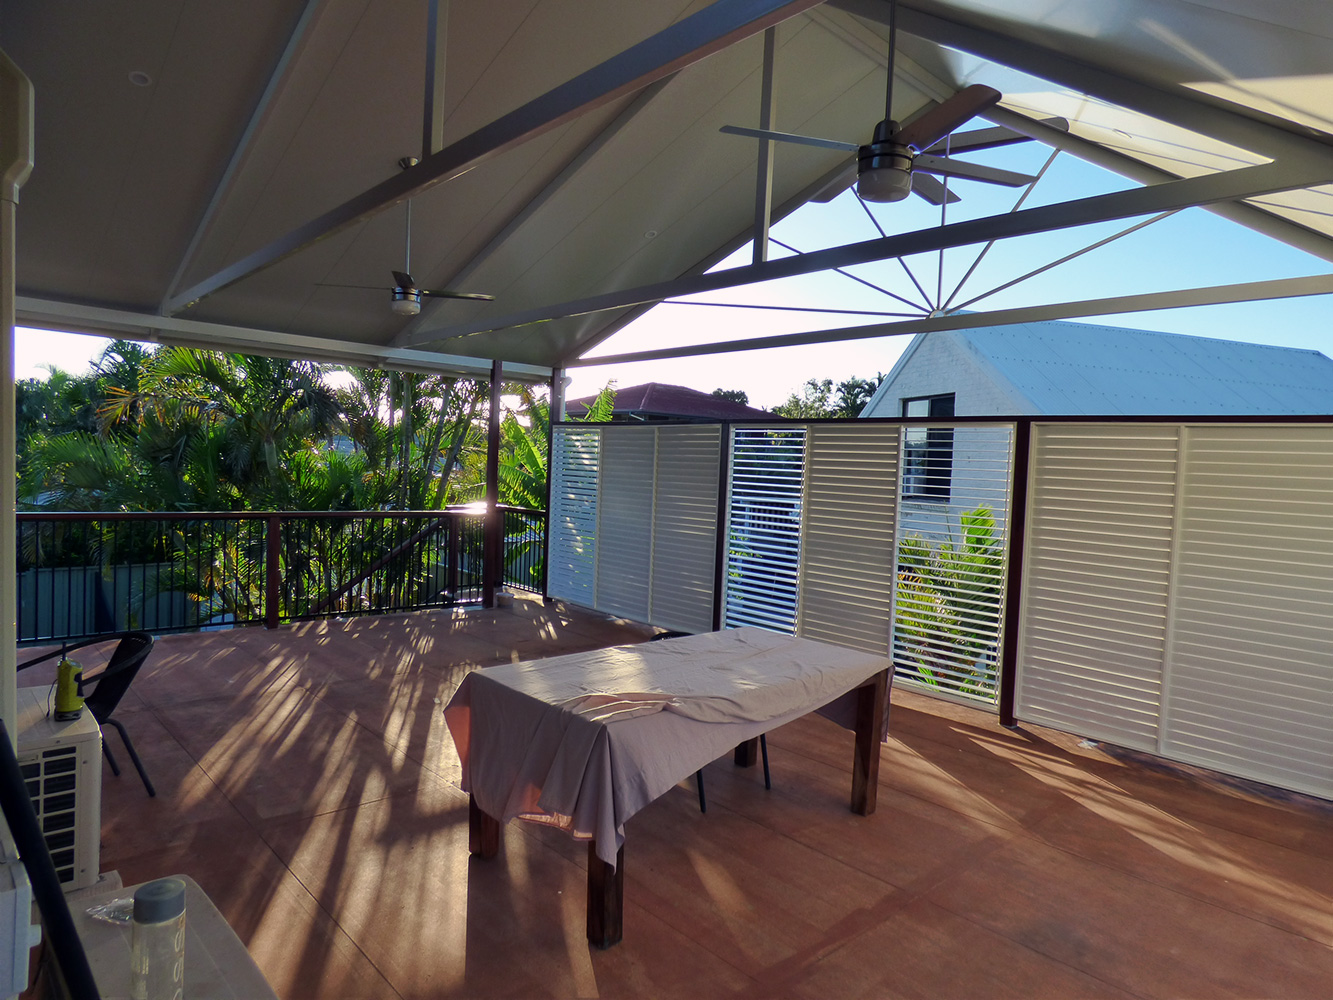 Gable Patios Brisbane Roof with fans for ventilation.